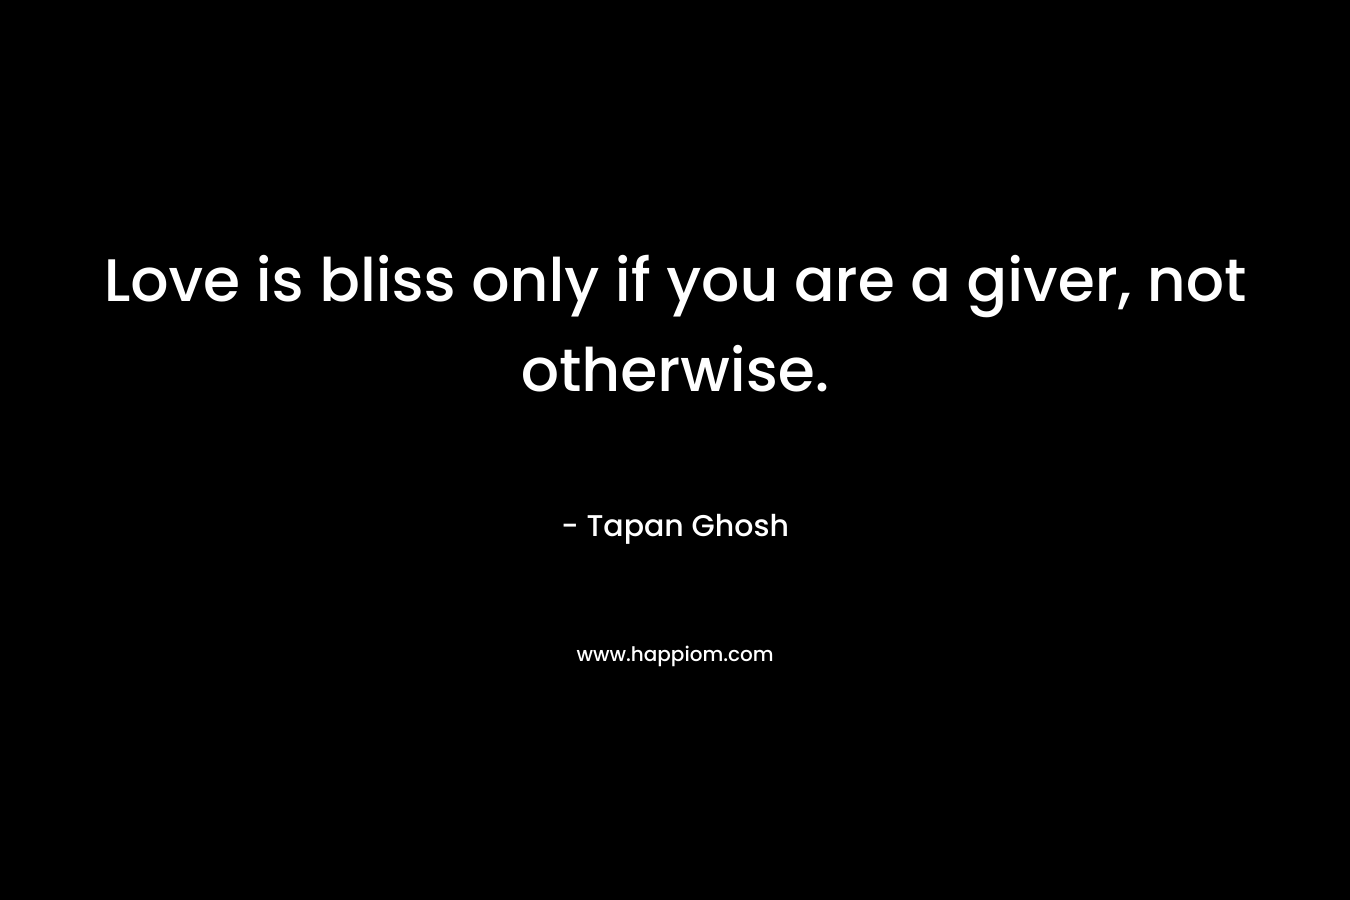 Love is bliss only if you are a giver, not otherwise.